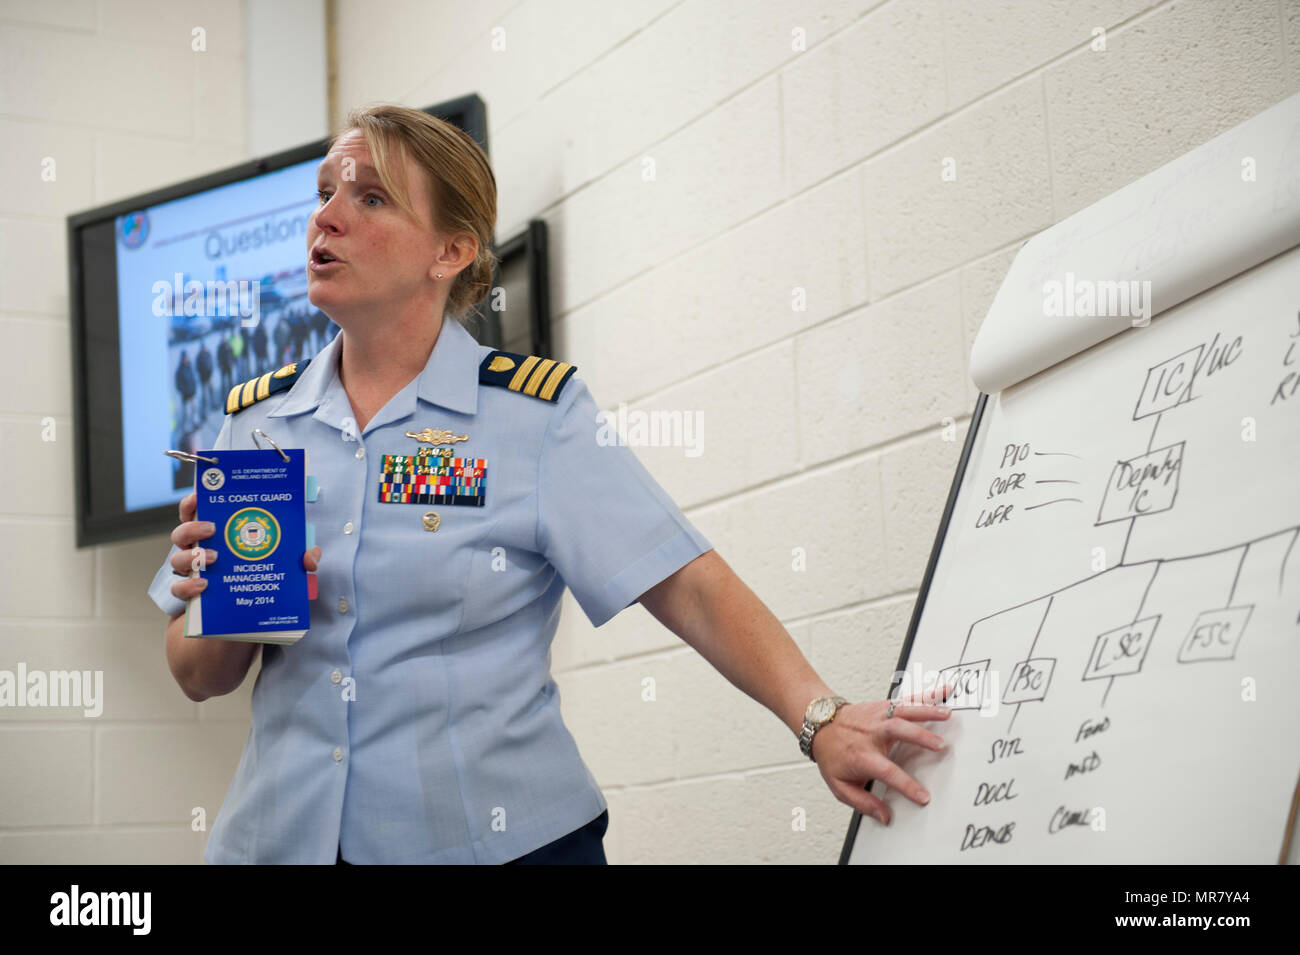 Coast Guard Cdr. Peggy Britton, response chief of Sector Hampton Roads in Portsmouth, Virginia, explains the Incident Command System to students from Queensland University of Technology in Brisbane, Queensland, Australia, at sector May 25, 2017.The students are pursuing master's degrees in complex program leadership and visited Sector Hampton Roads to learn about the Coast Guard's structure and interagency strategies.  (U.S. Coast Guard photo by Petty Officer 3rd Class Corinne Zilnicki/Released) Stock Photo